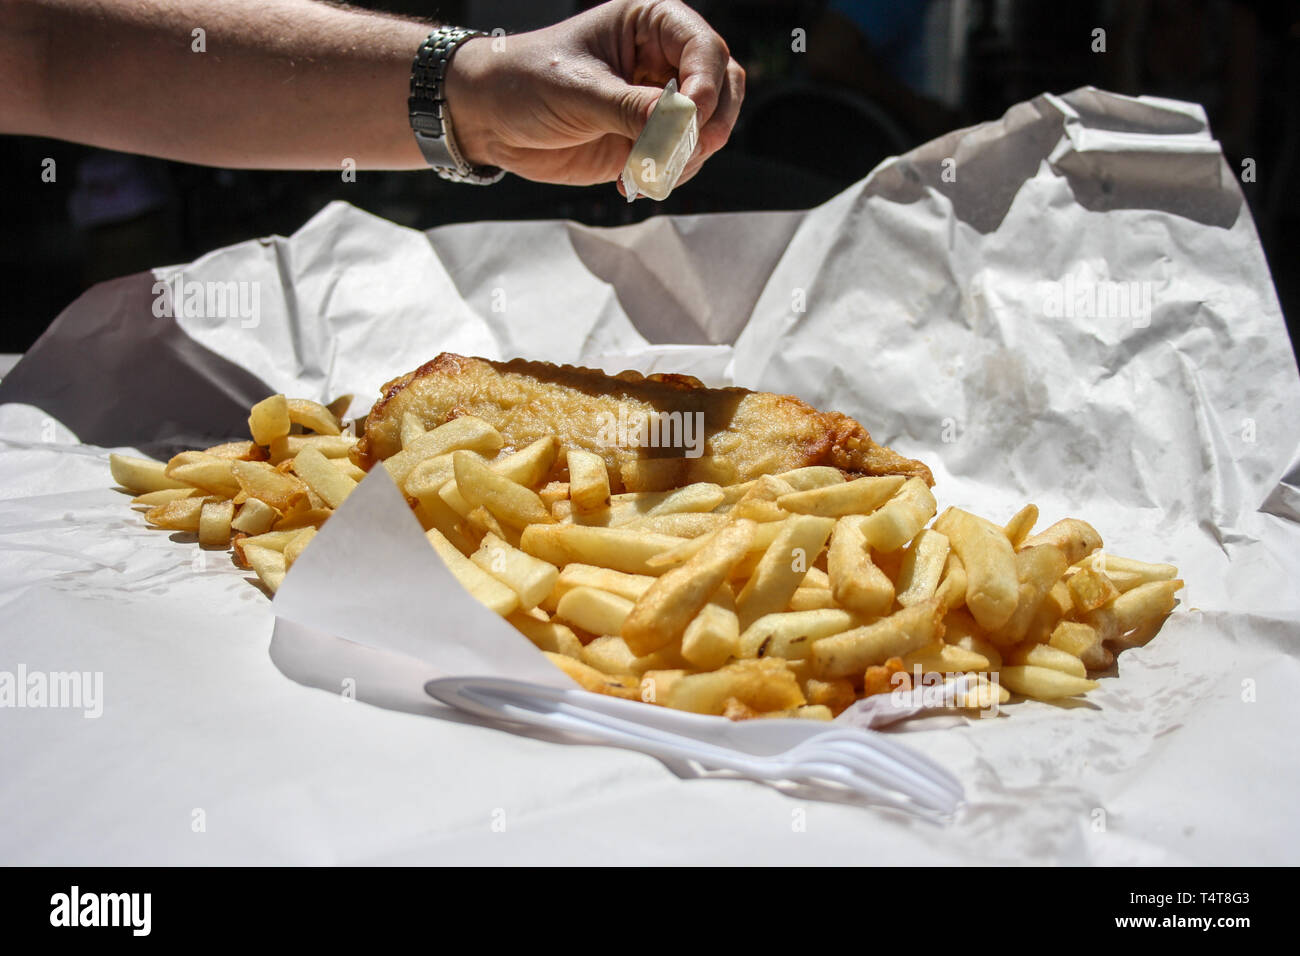 Takeaway fish and chips meal, served on a paper with plastic fork, Australia Stock Photo Alamy